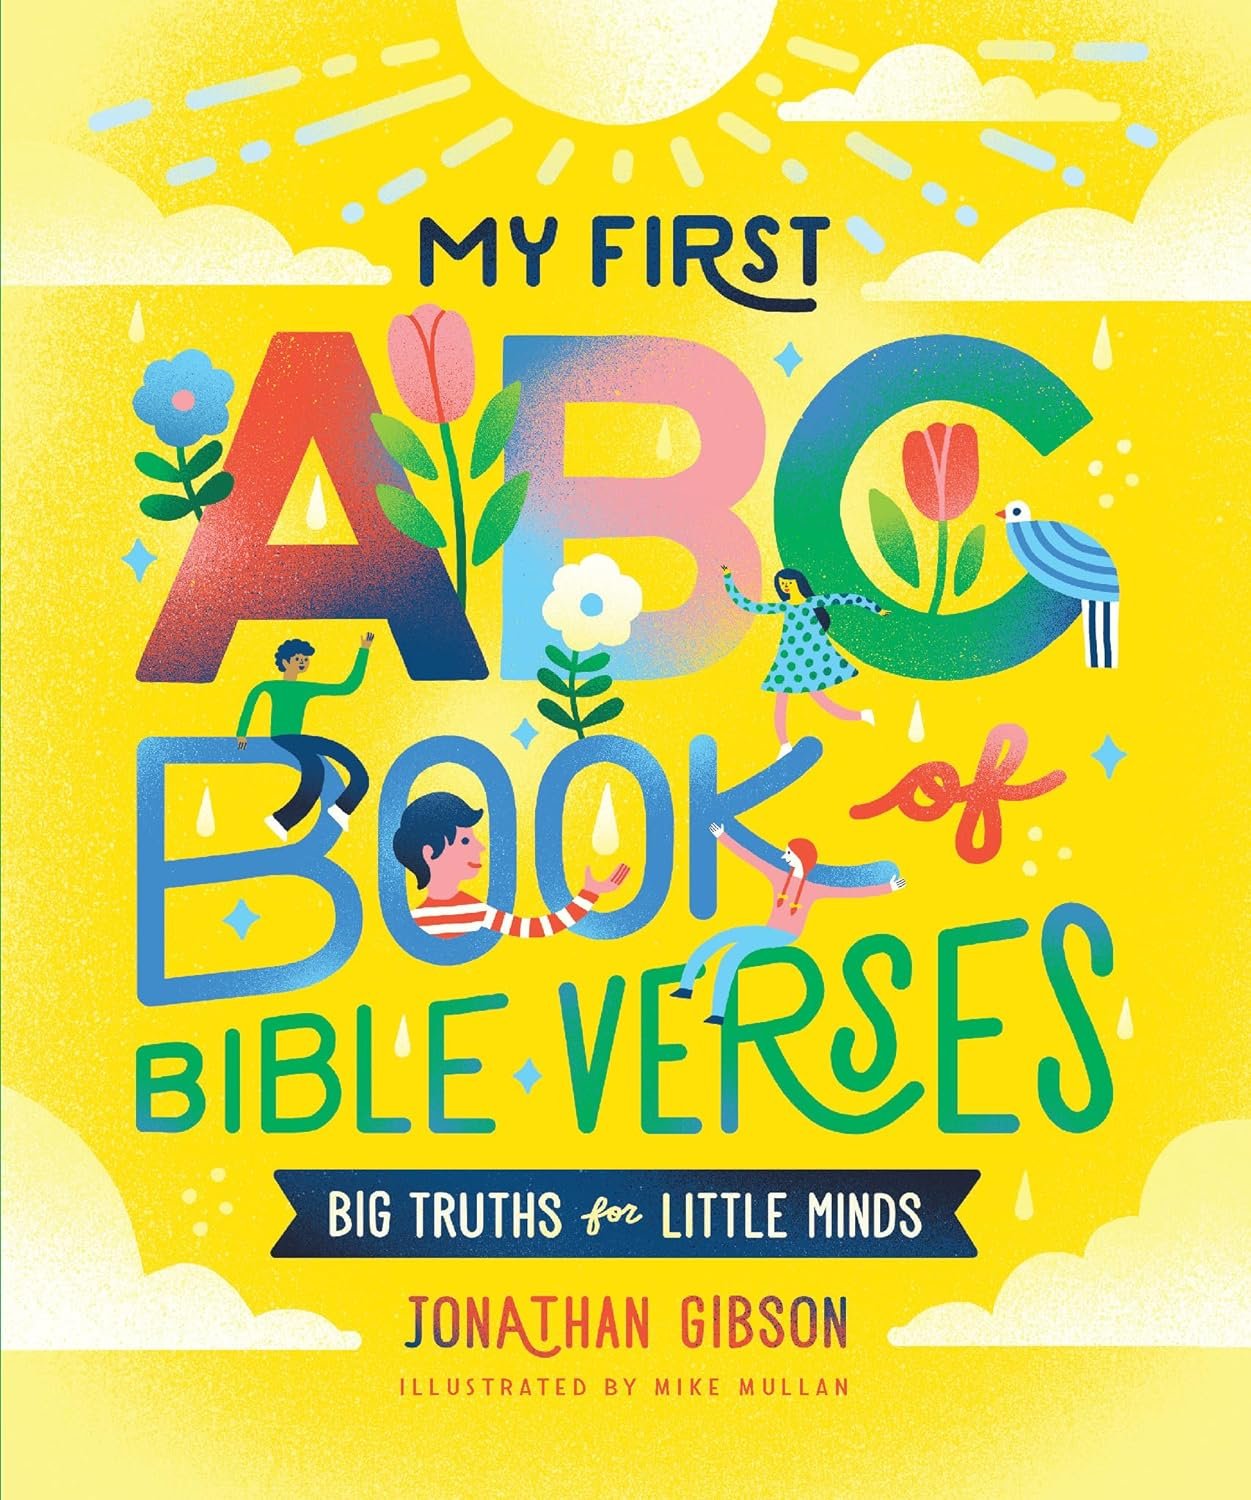 My First ABC Book of Bible Verses Big Truths for Little Minds.jpg